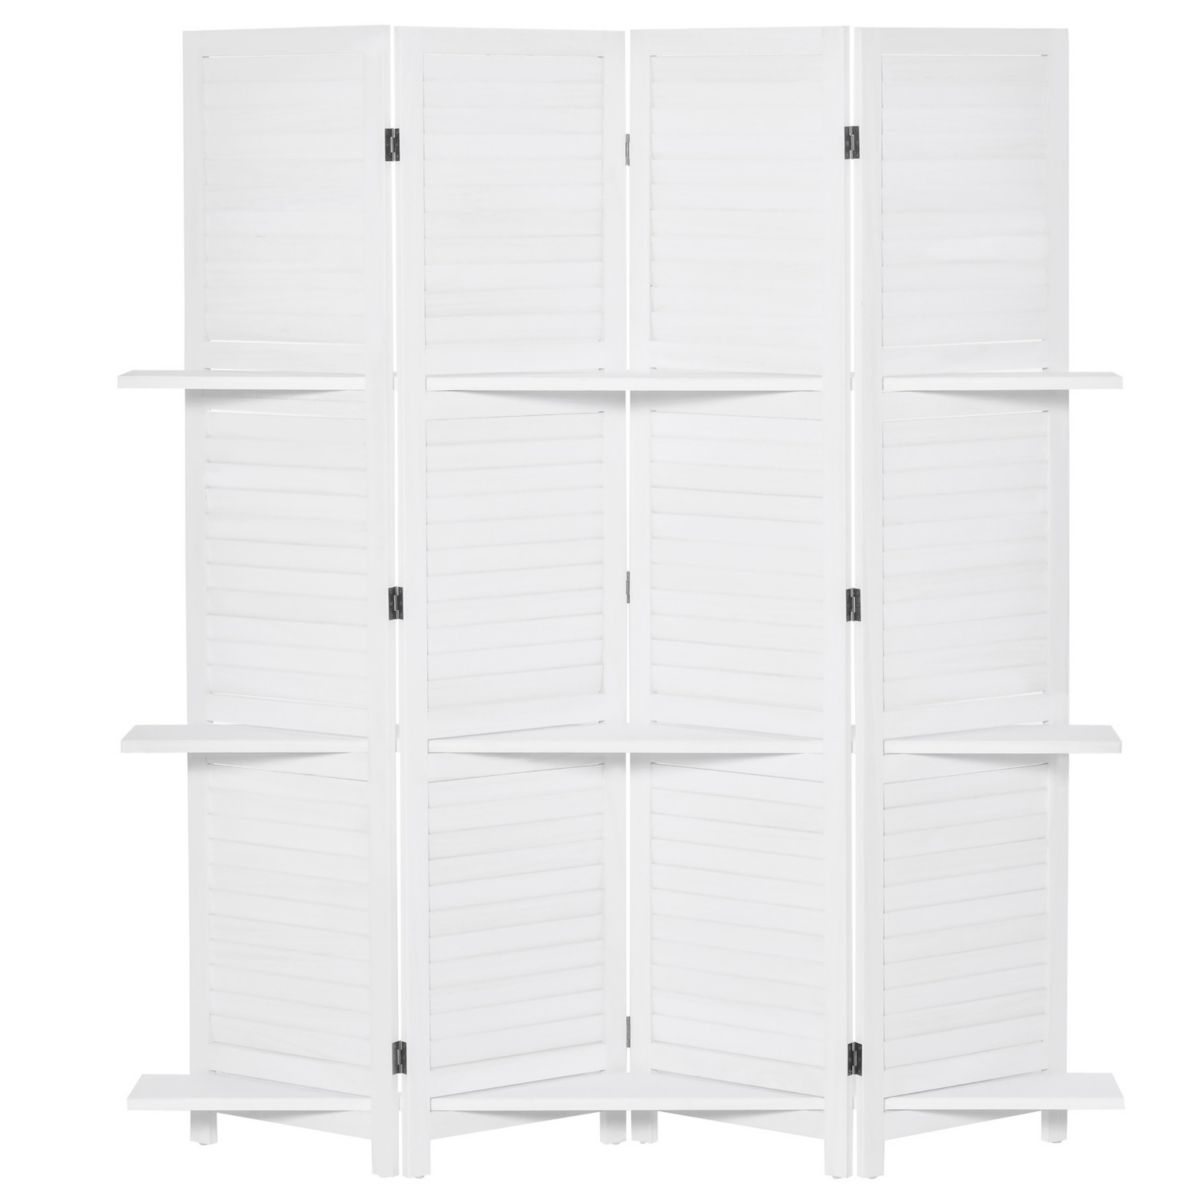 Wood Mobile Folding Privacy Screen Partition Wall Room Divider W/ Shelves White HomCom